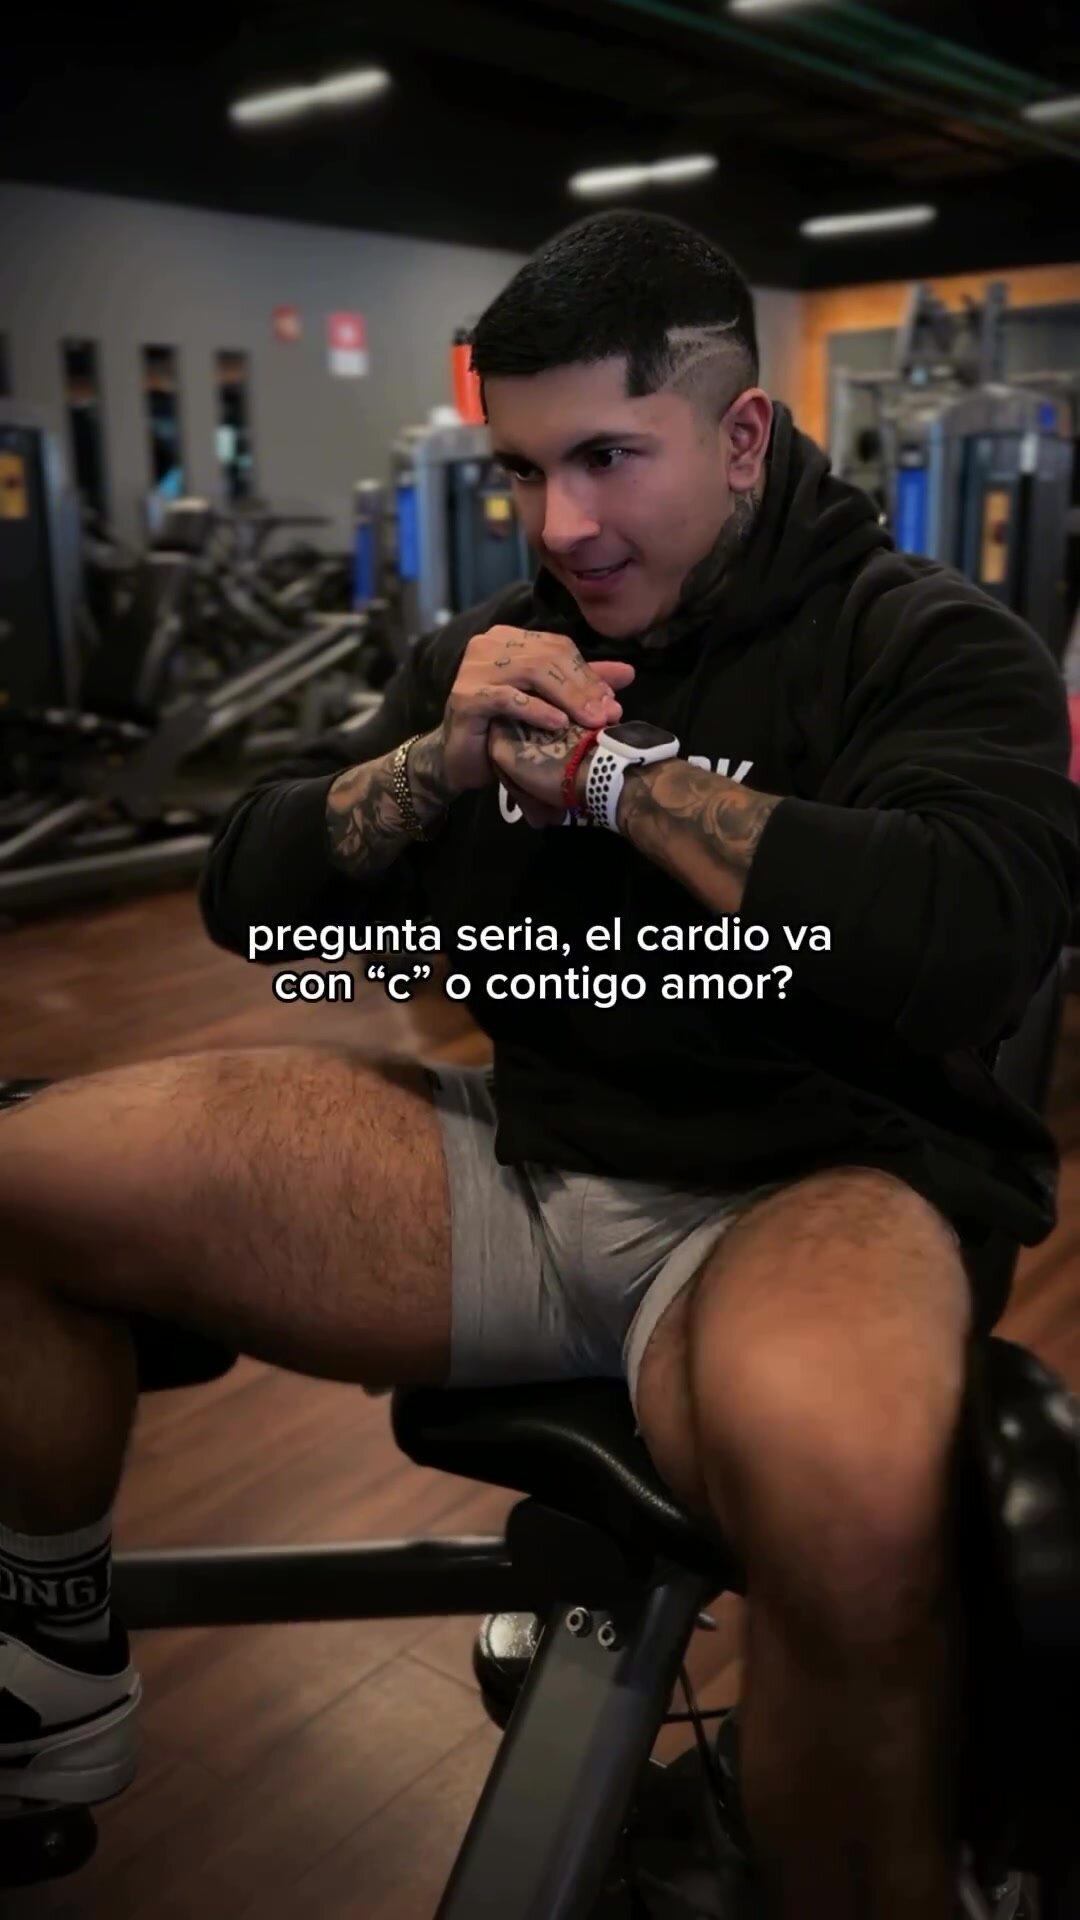 Hot workout, nice bulge and legs